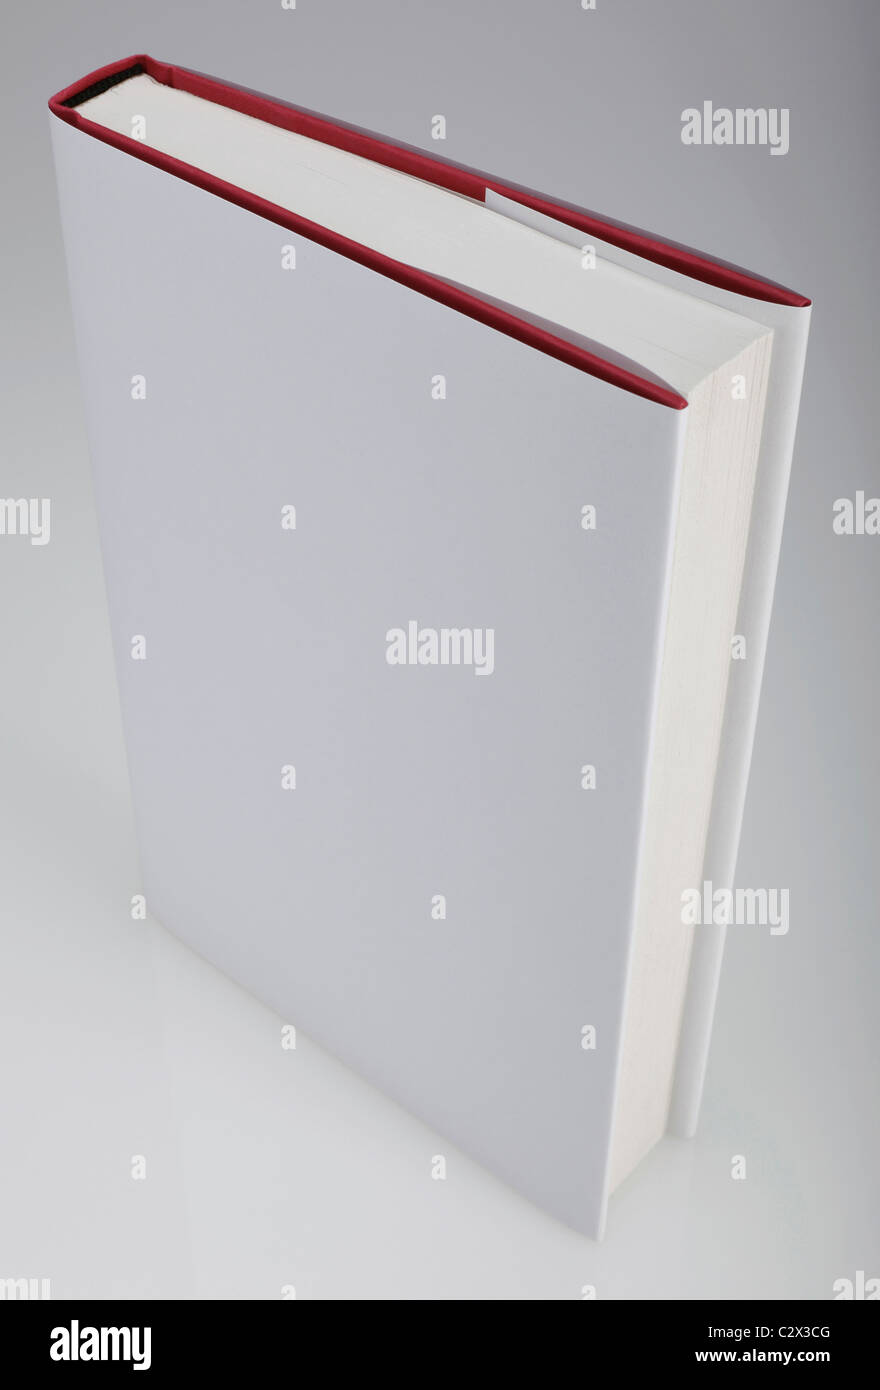 Plain white hardcover book for design layout Stock Photo